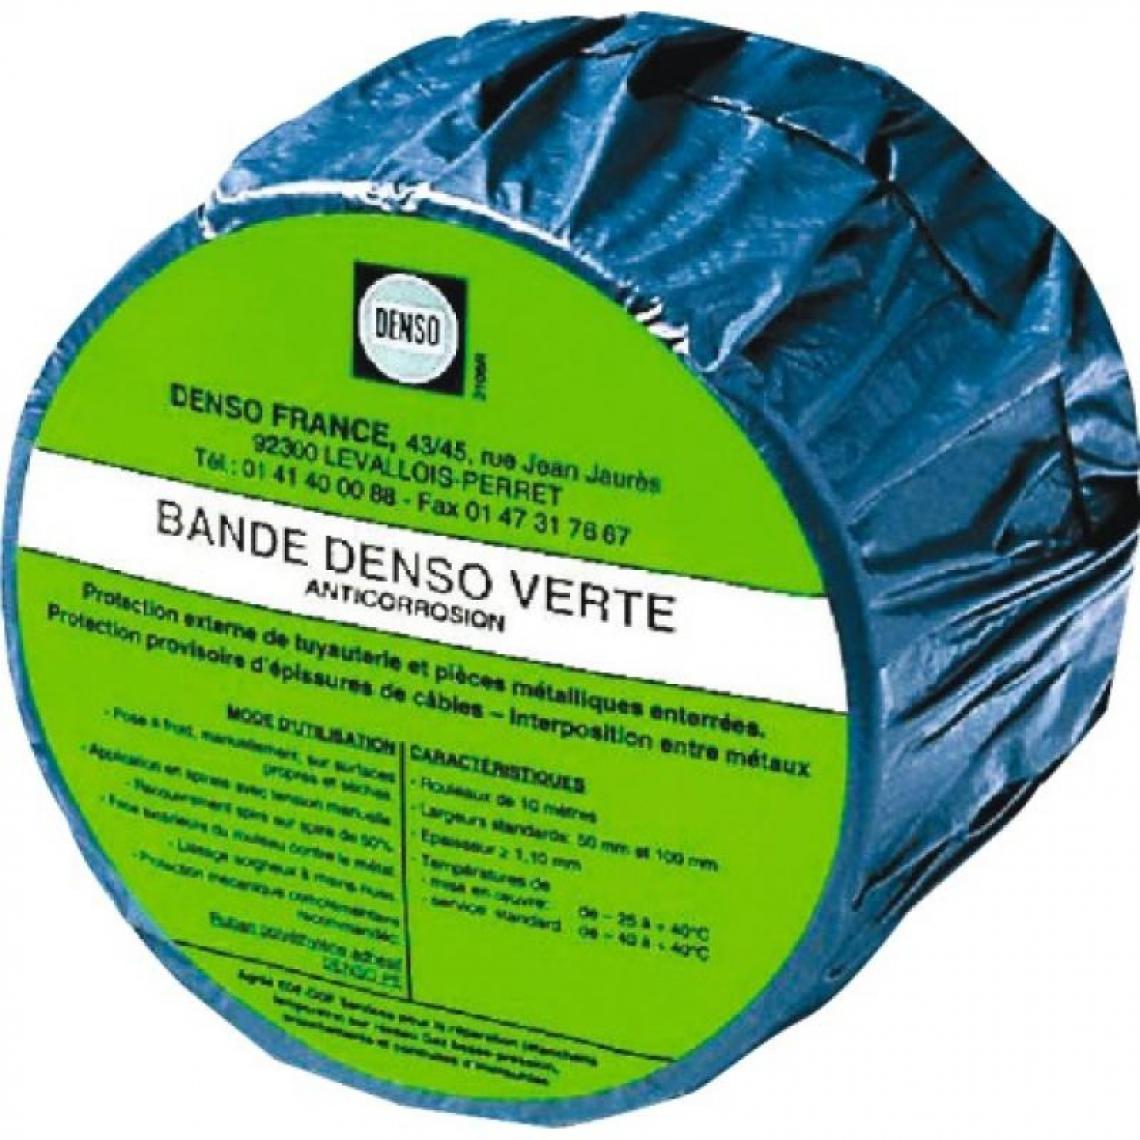 Denso - Bande Denso verte largeur 100 mm longueur 10 - Mastic, silicone, joint